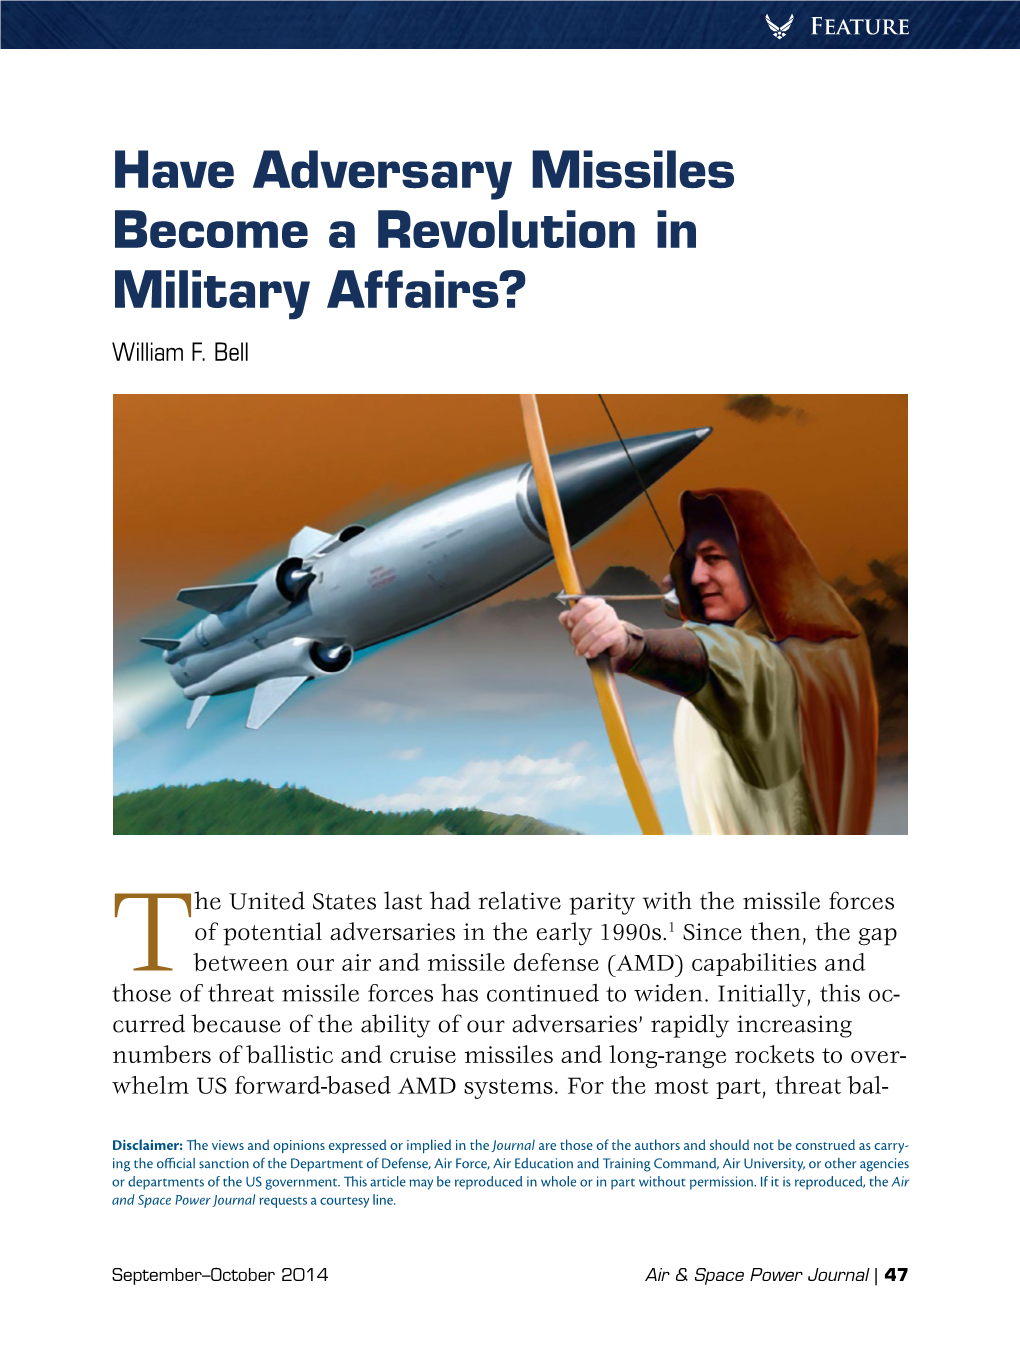 Have Adversary Missiles Become a Revolution in Military Affairs? William F